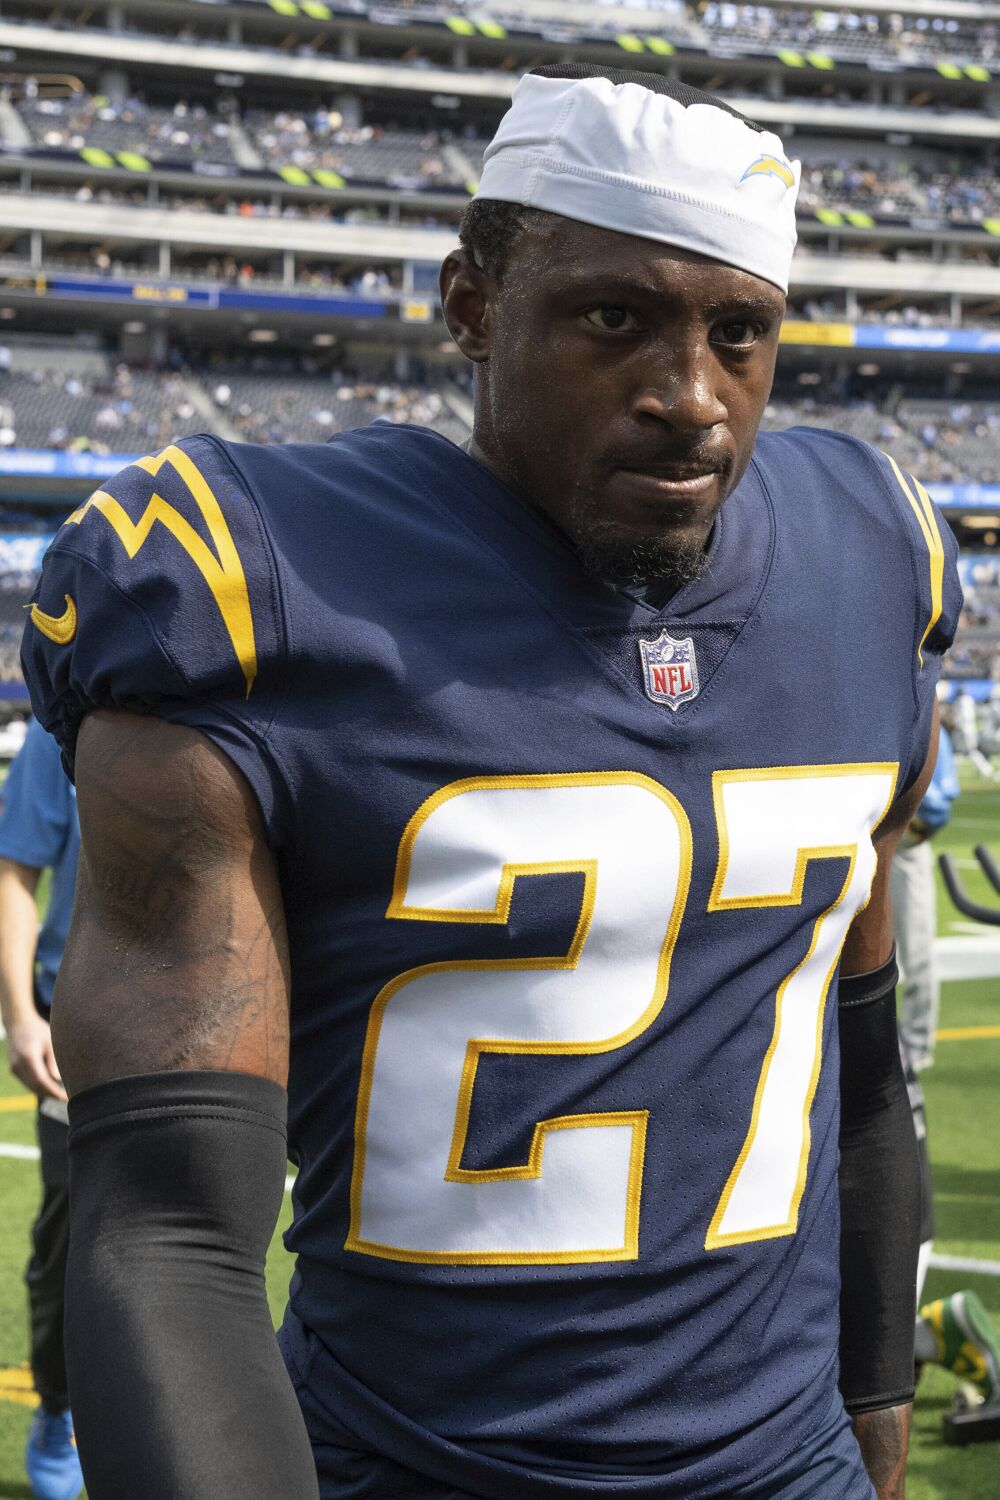 Chargers' J.C. Jackson arrested in connection to a 'family issue'